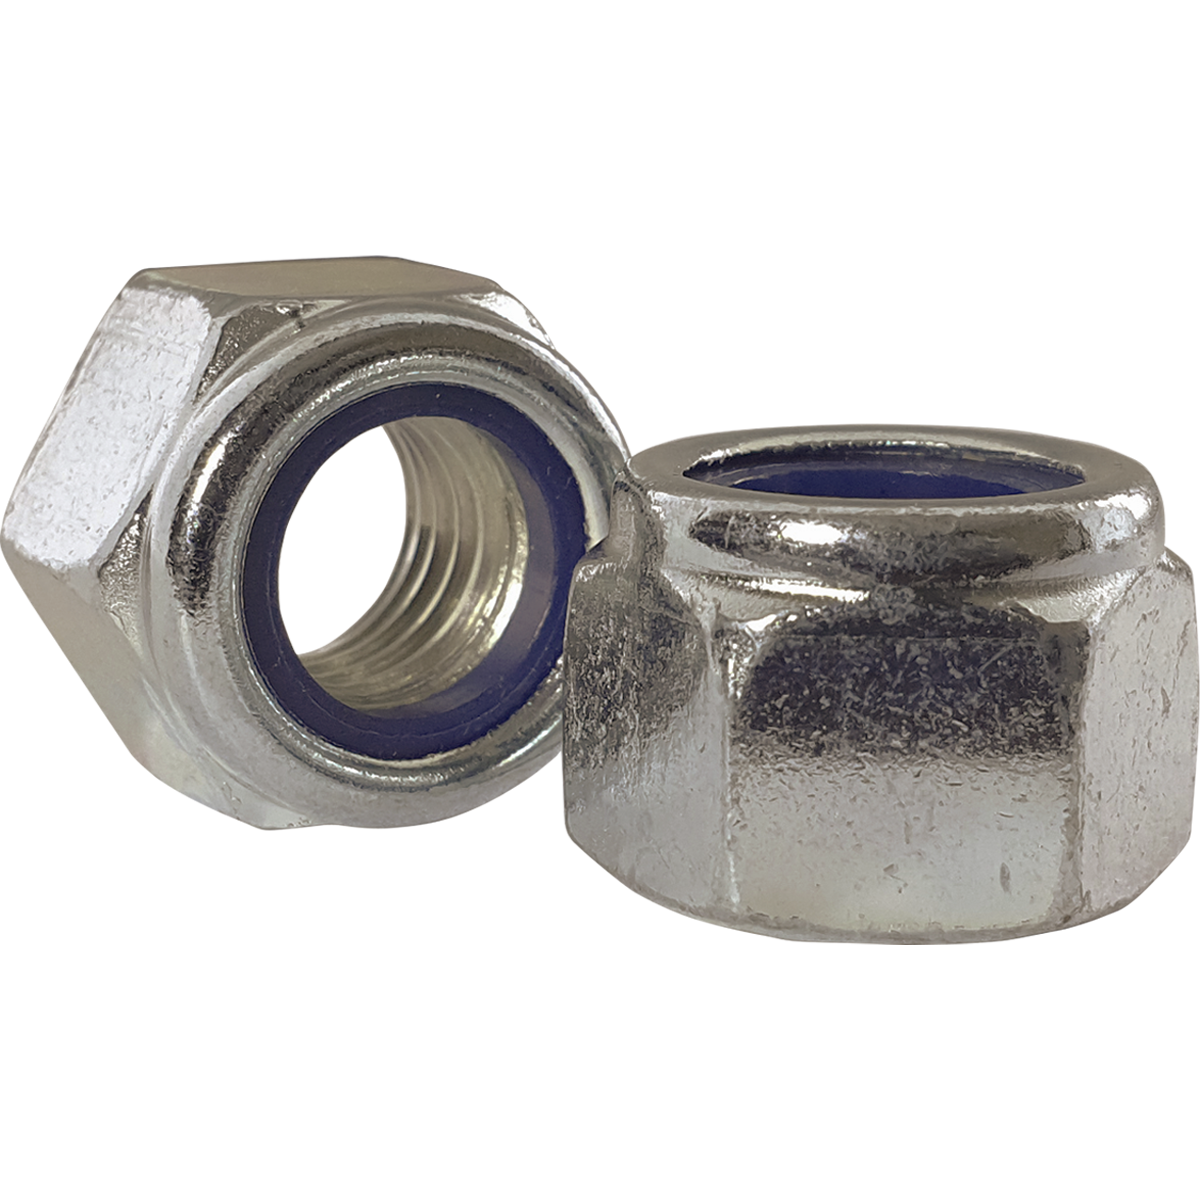 Corrosion resistant A4 stainless steel, high type, nylon insert nuts, also known as Nyloc nutss.